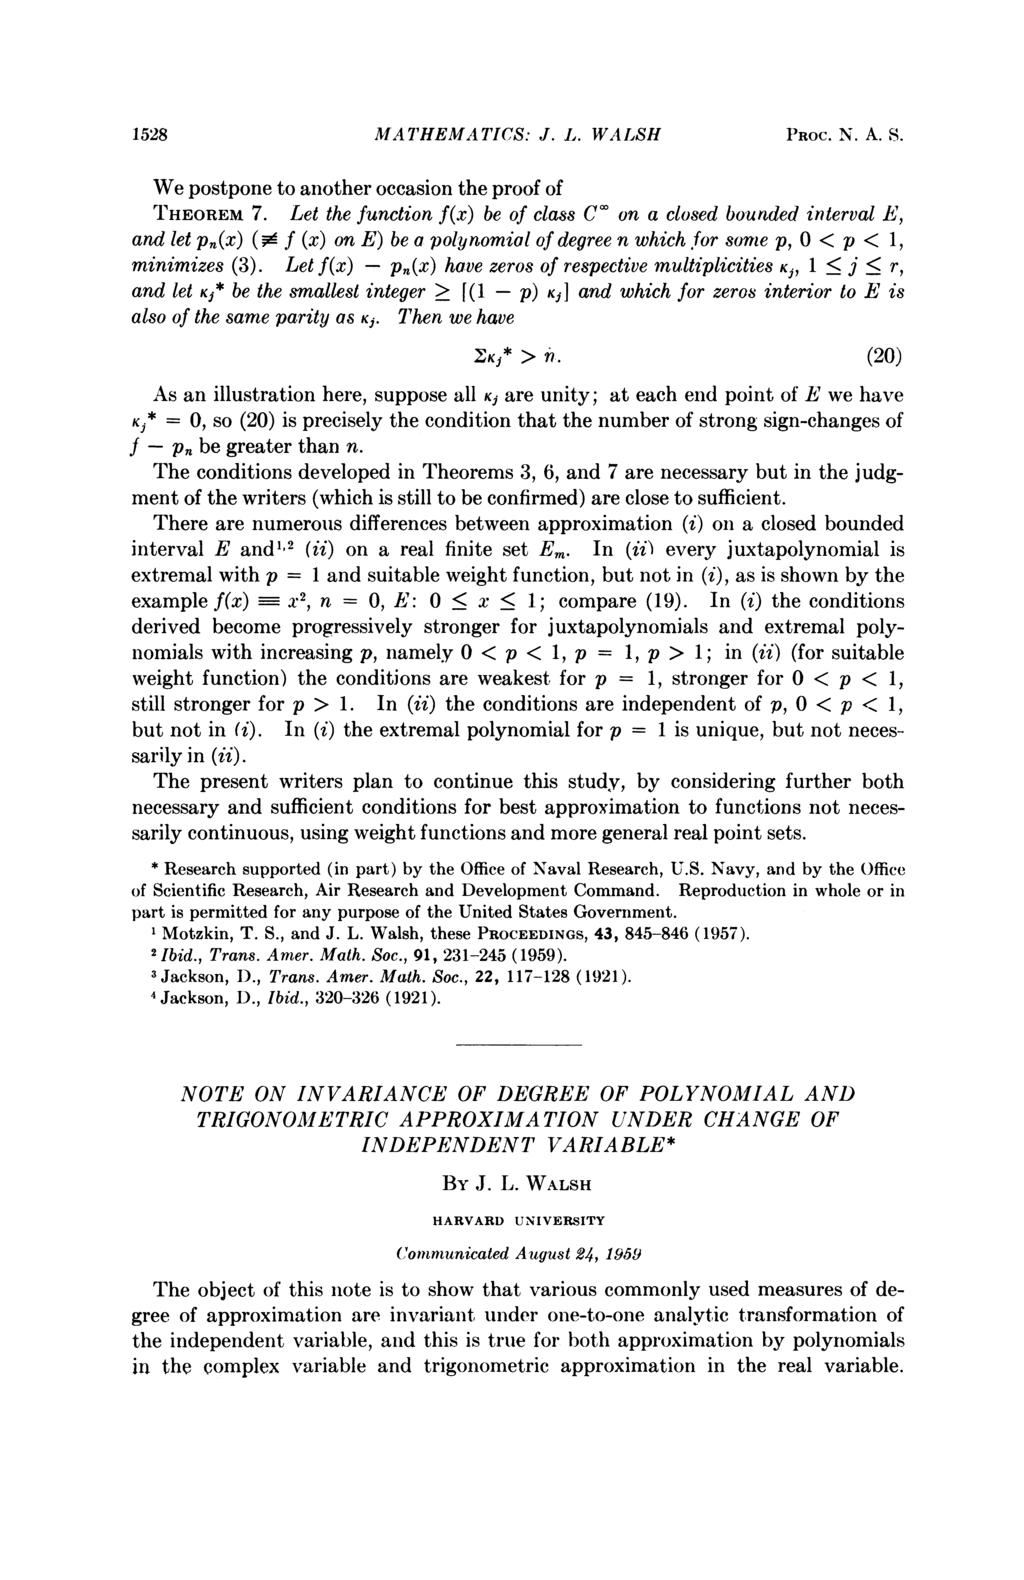 1528 MATHEMATICS: J. L. WALSH PROC. N. A. S. We postpone to another occasion the proof of THEOREM 7.